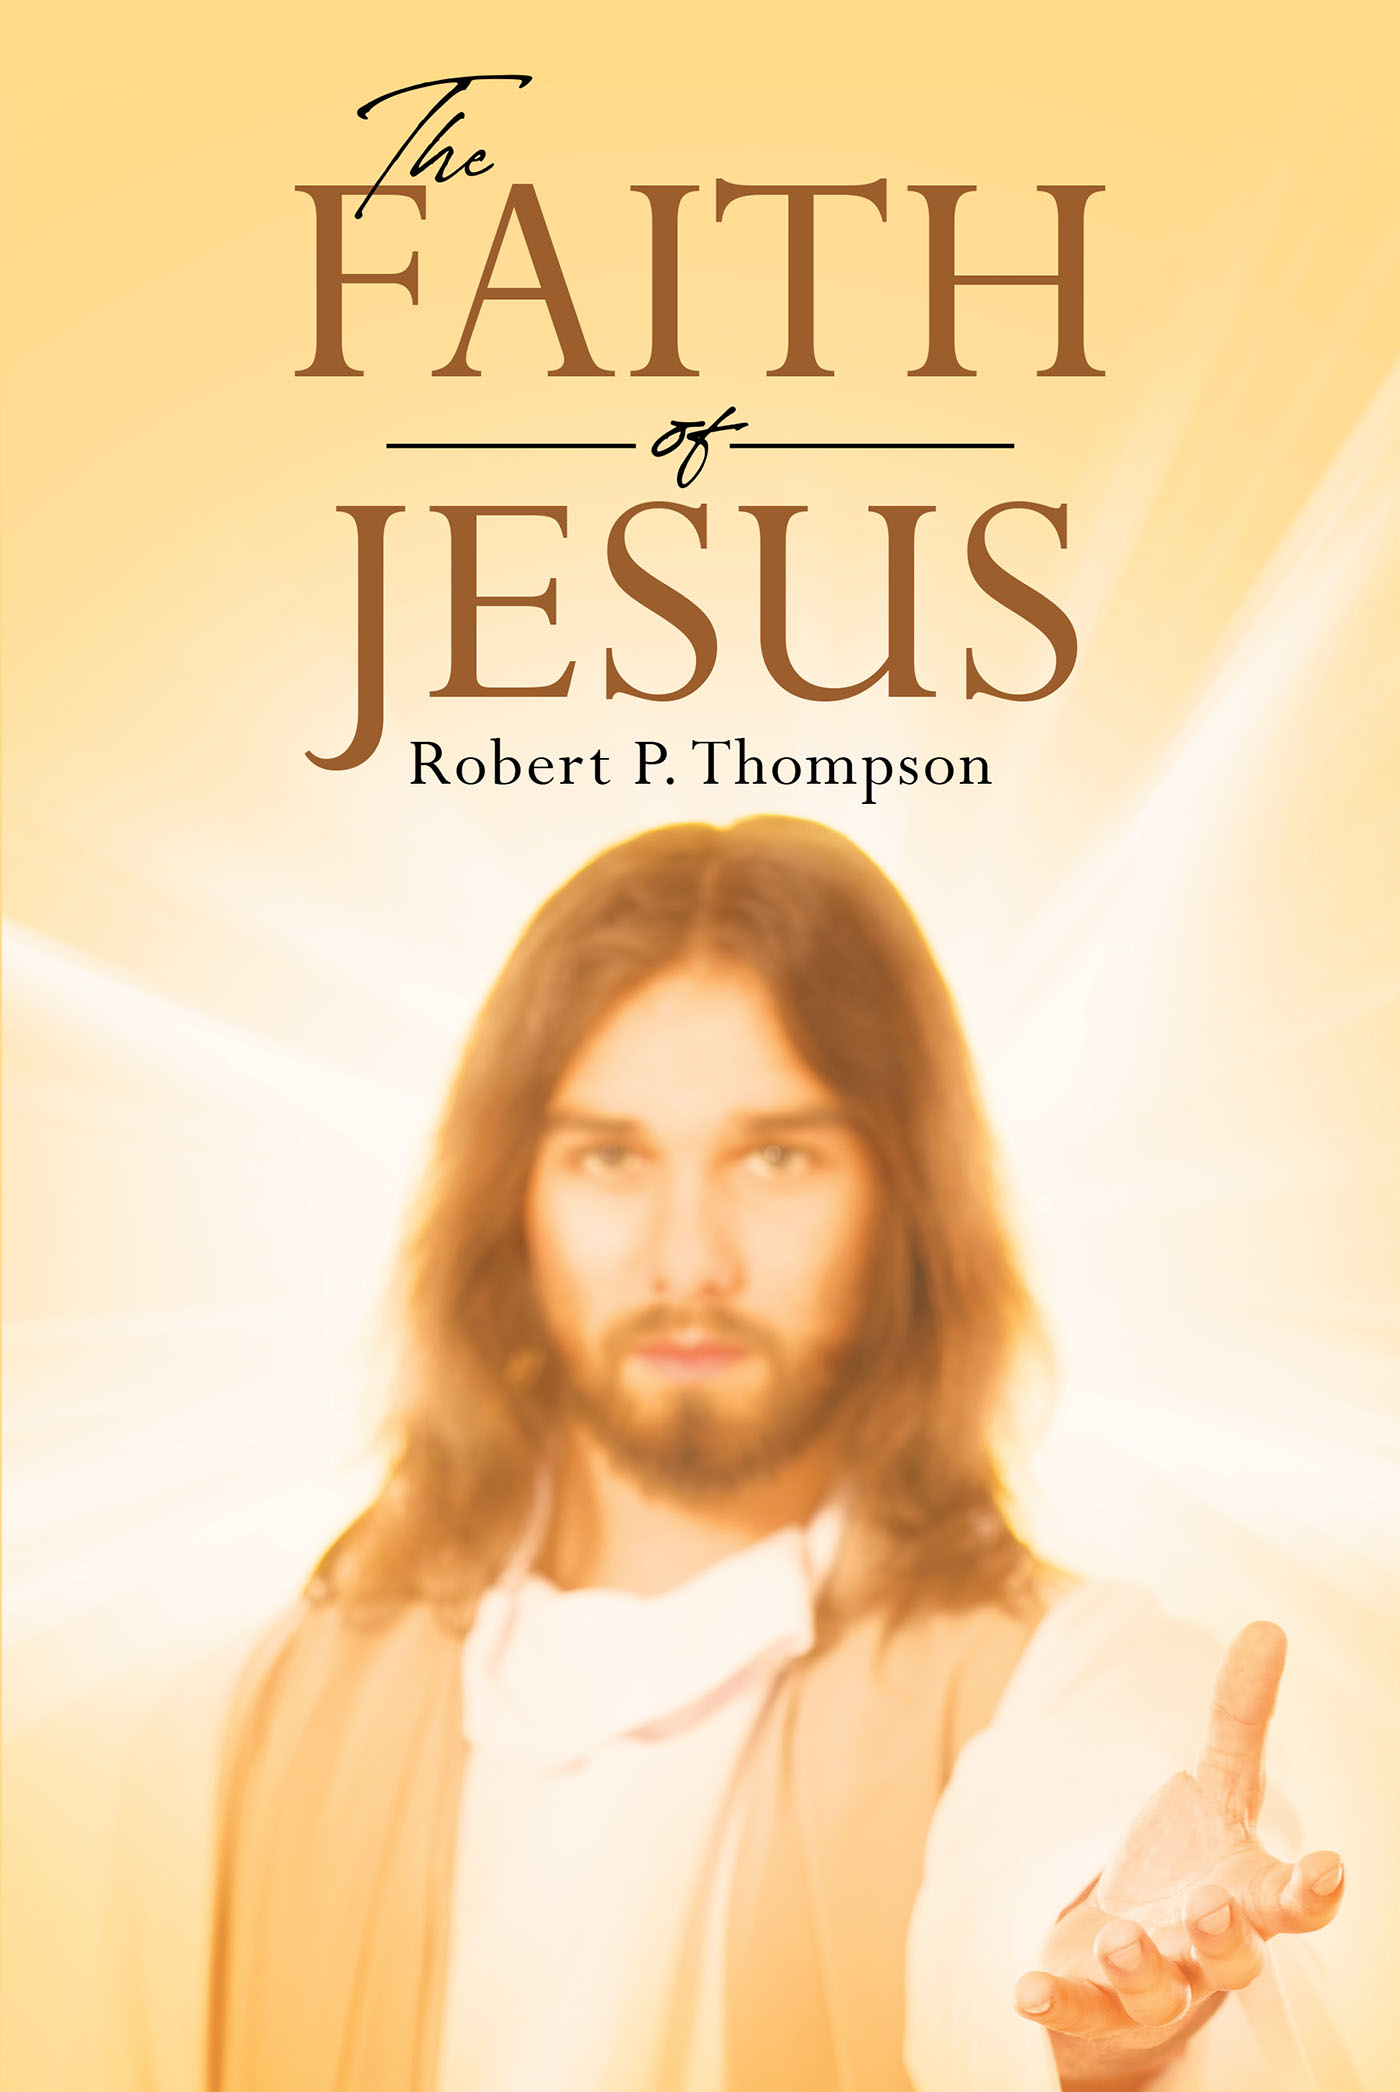 Author Robert P. Thompson’s New Book, "The Faith of Jesus," Provides the Steps Readers Can Take in Order to Better Understand the Lord's Messages and Live as Christ